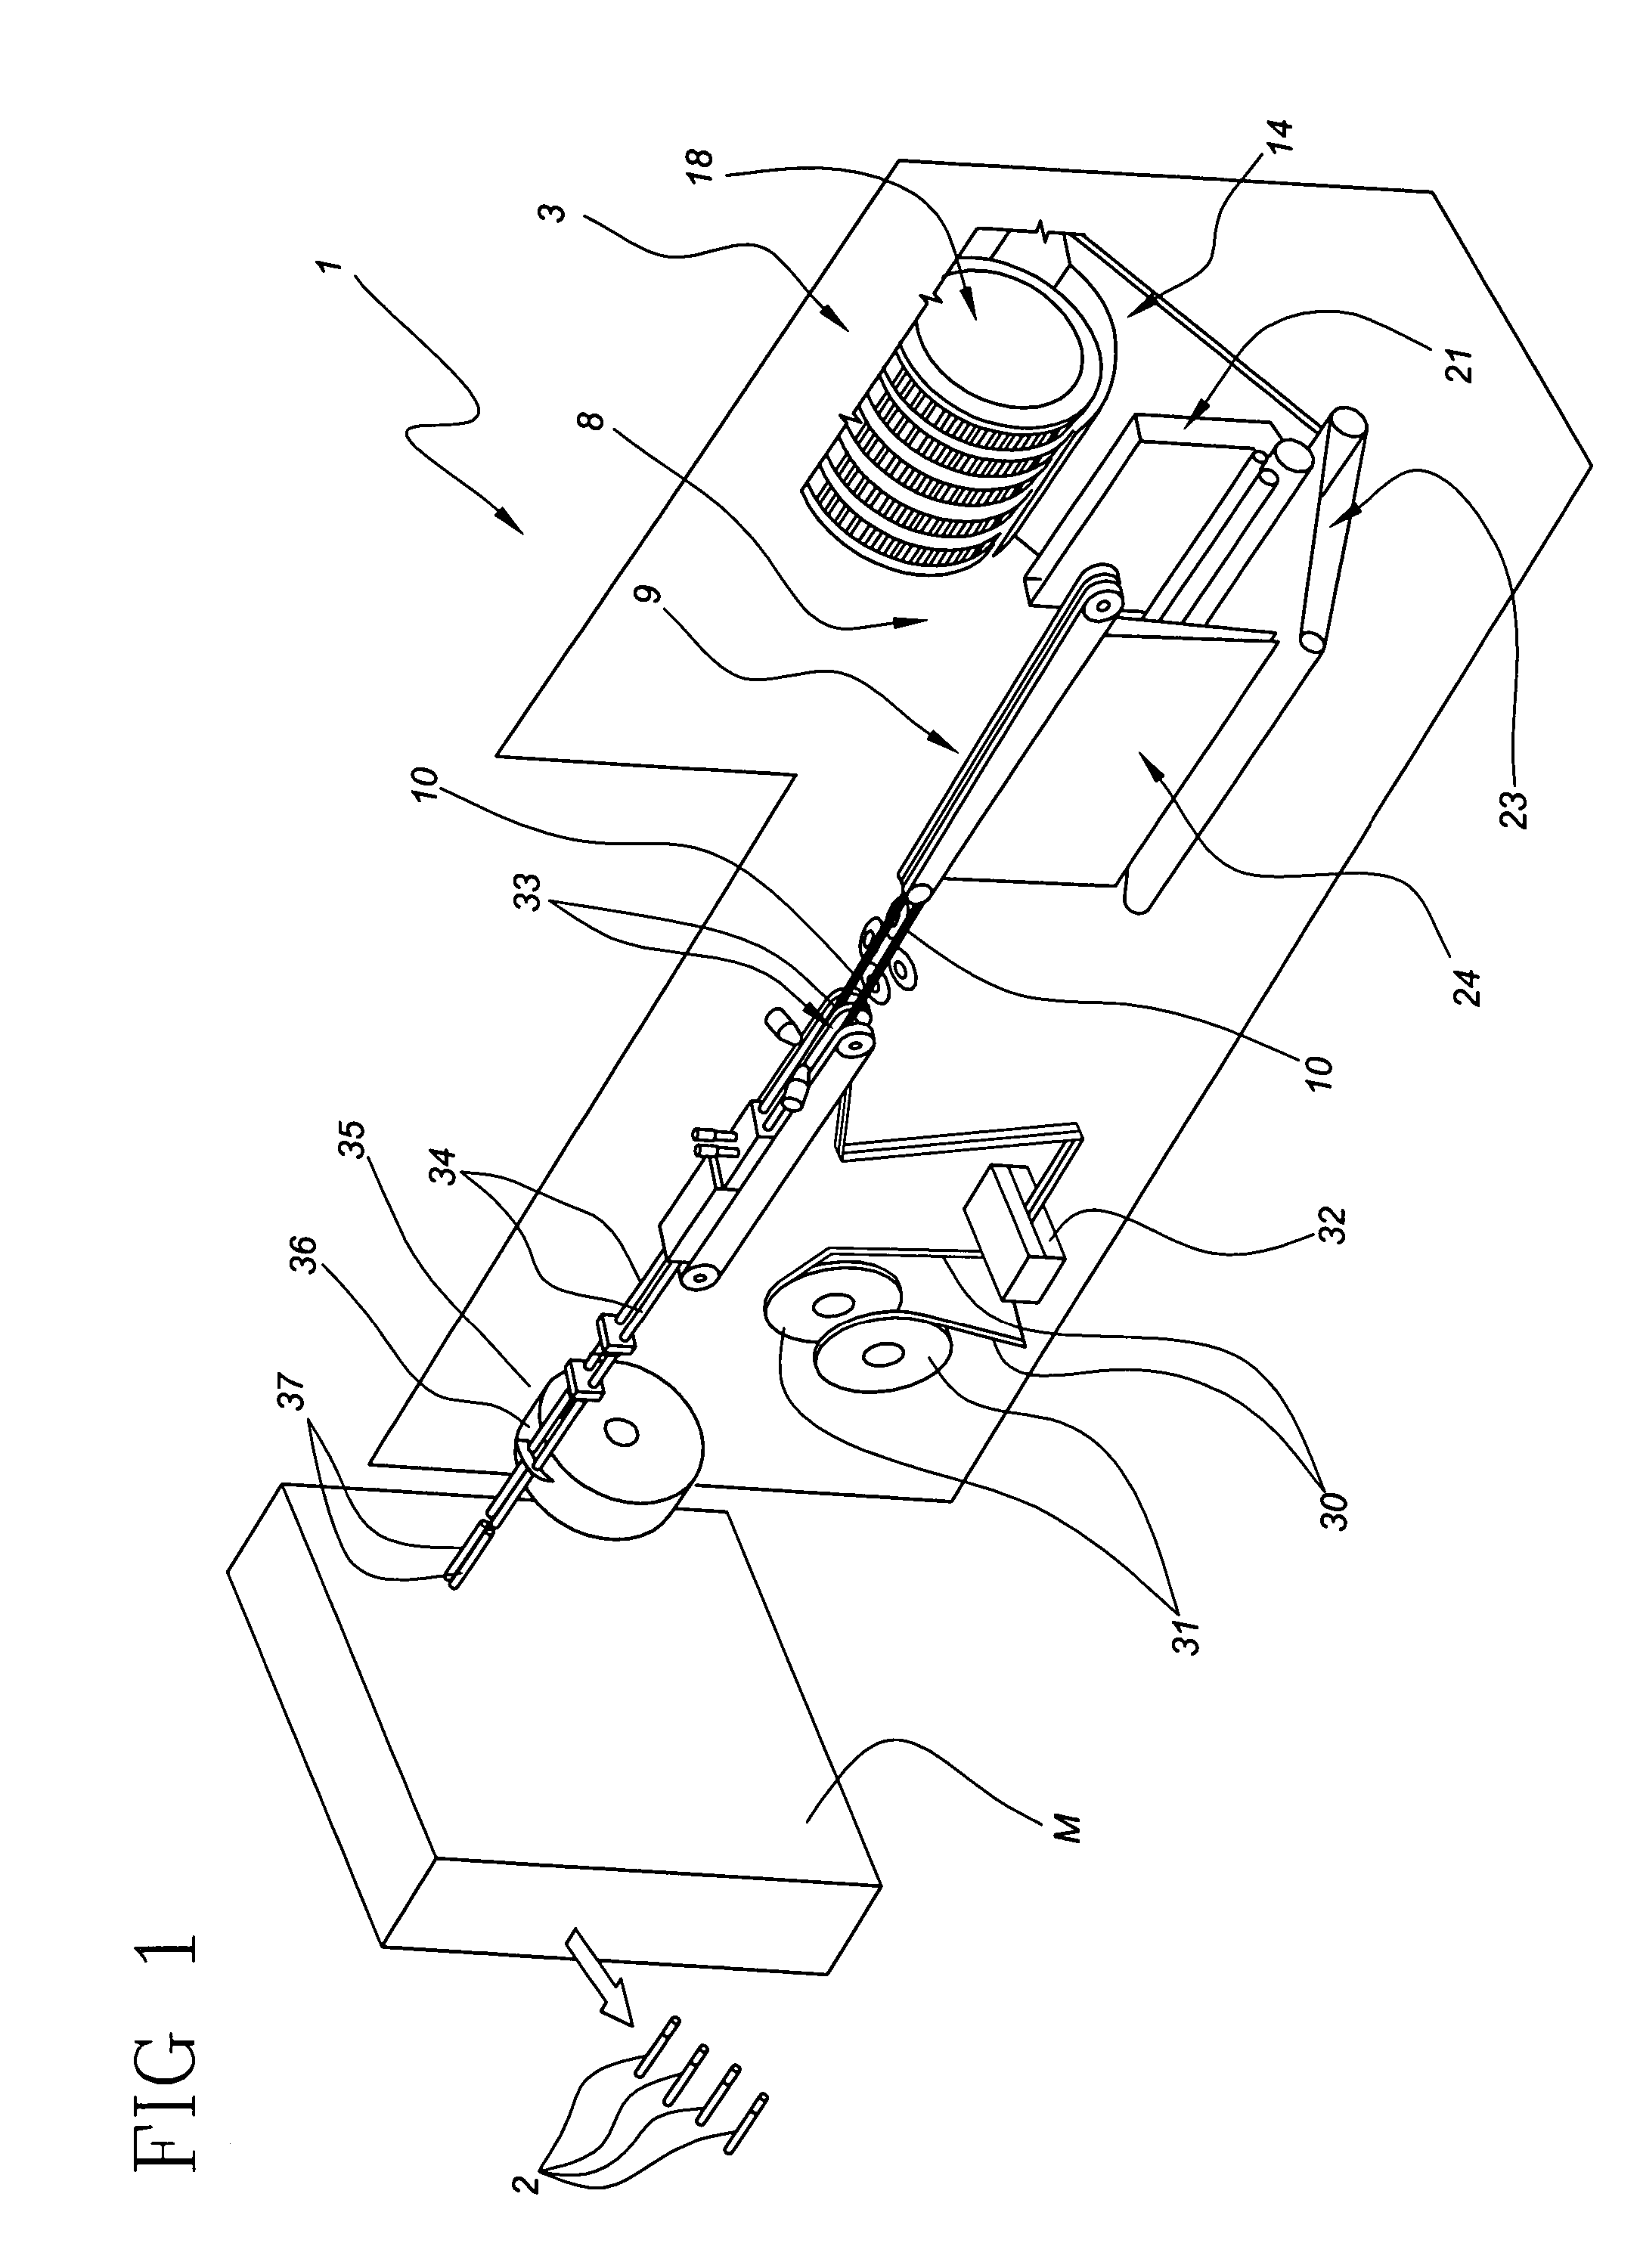 Unit and a method for feeding tobacco in a machine for manufacturing tobacco products